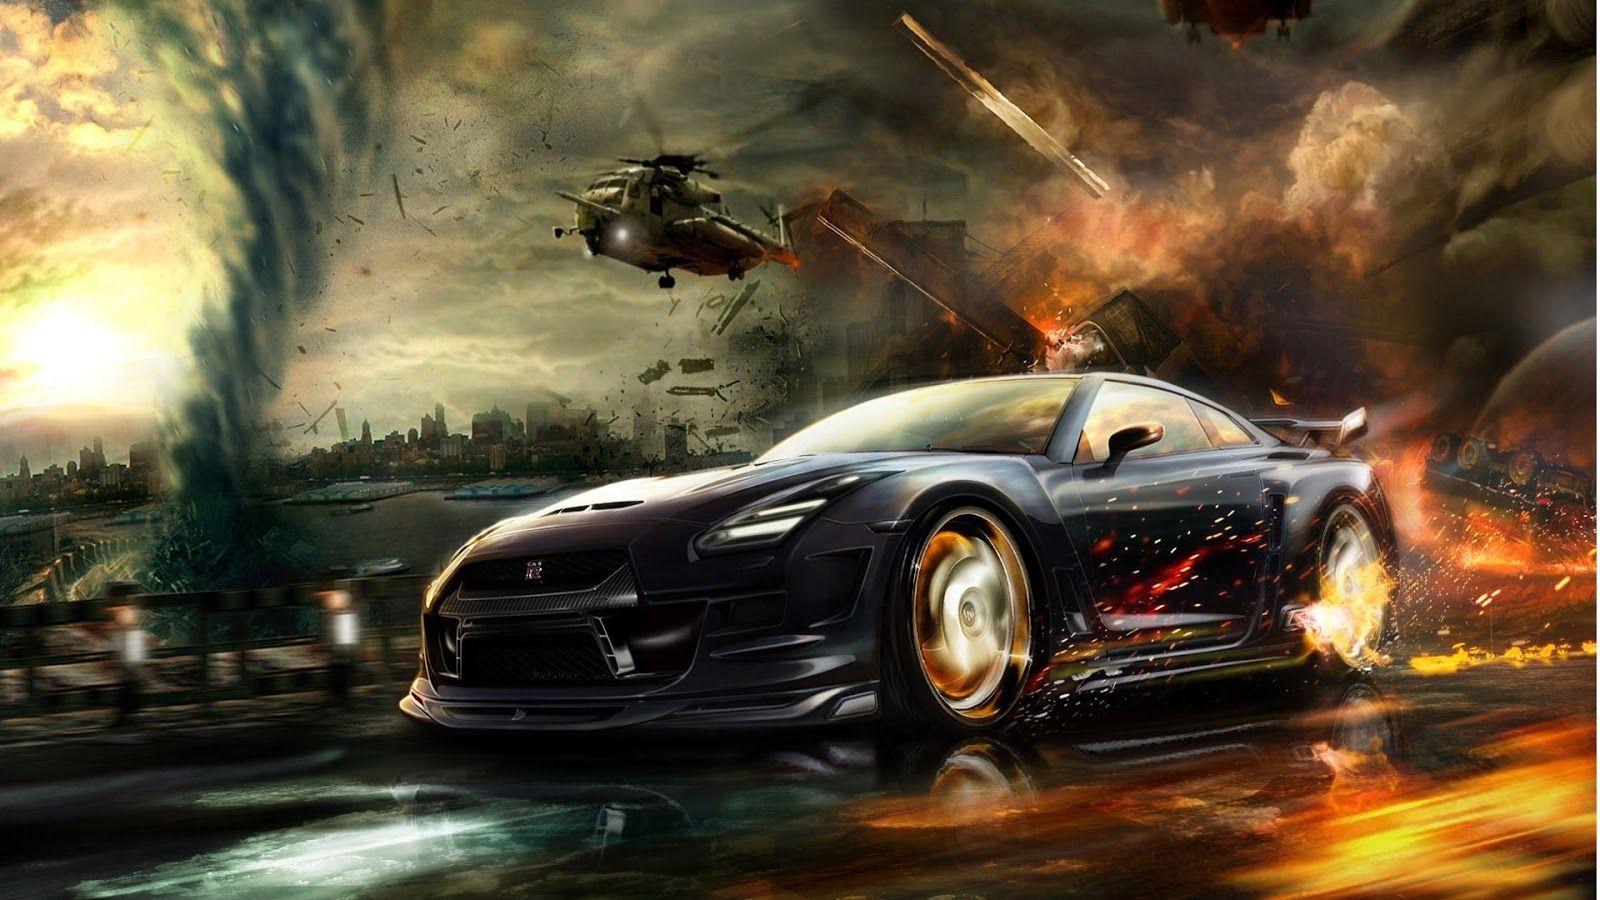 Awesome HD Car Game Wallpaper 1080p Background Llection Of Ol